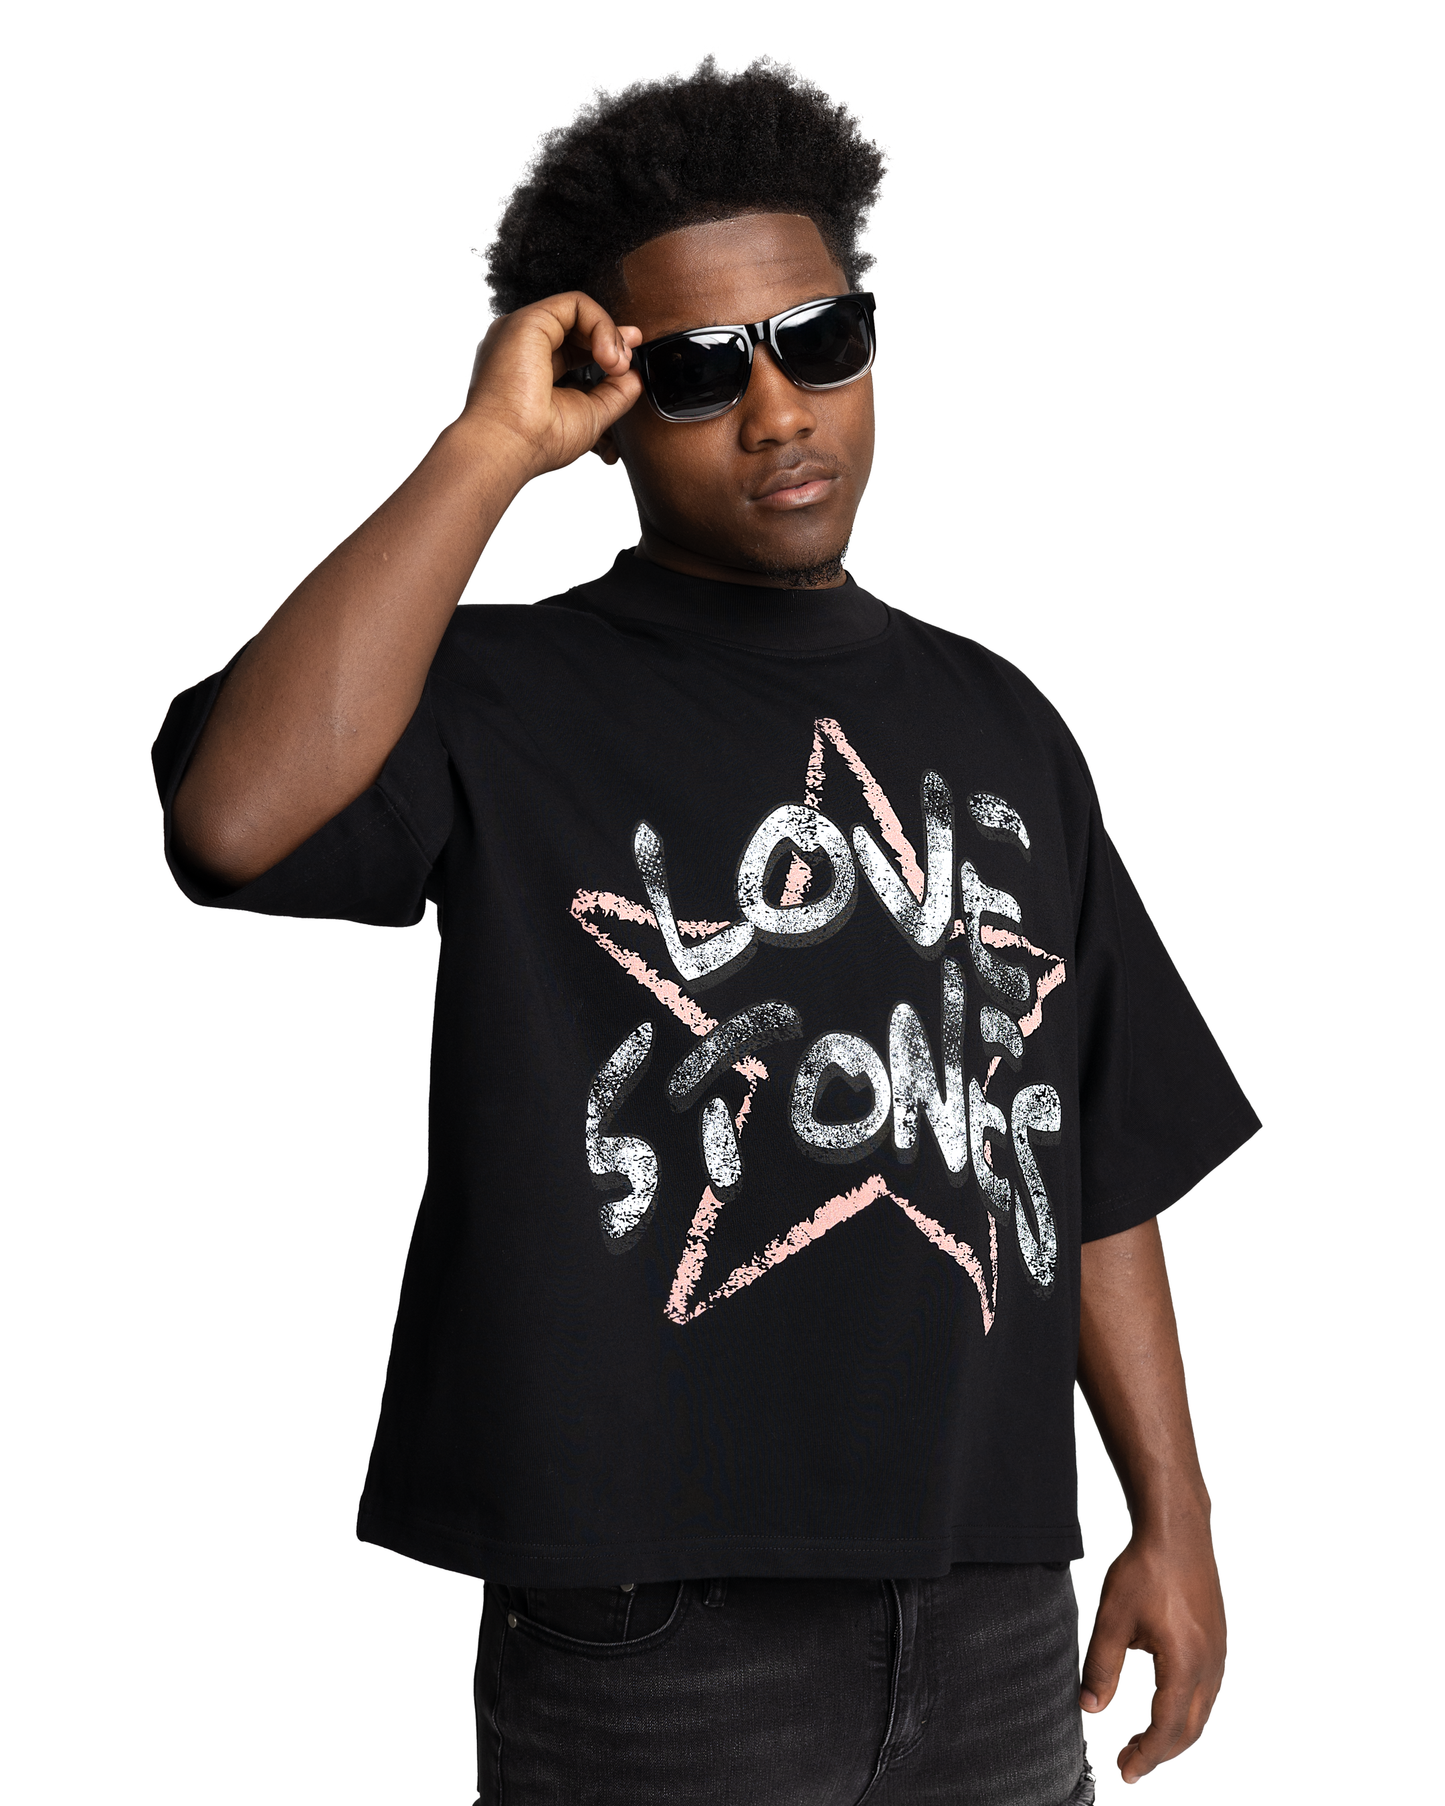 “Exclusive” Island Star T-Shirt - Black & Red